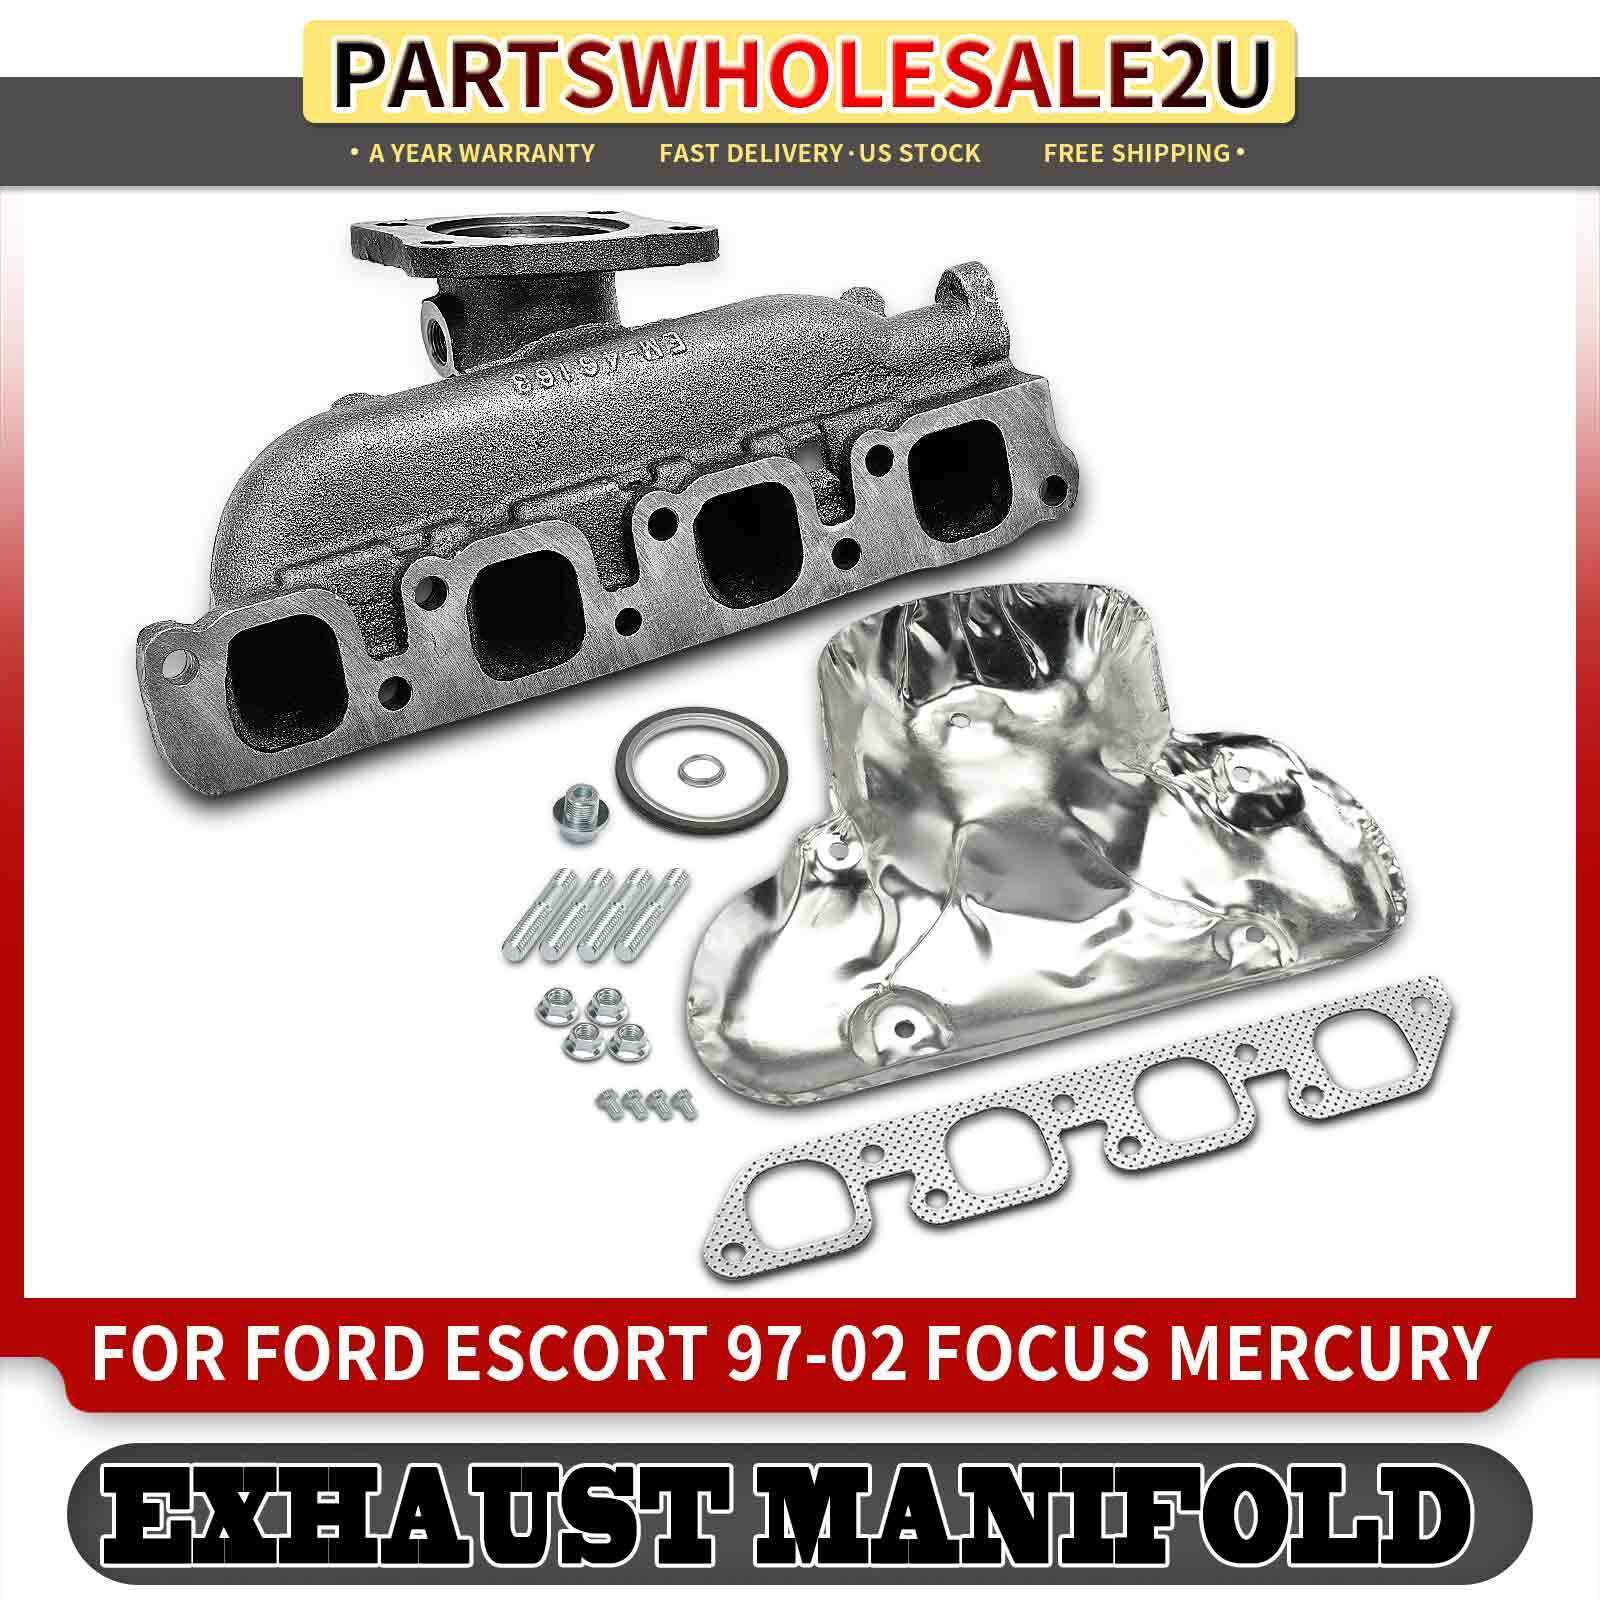 Exhaust Manifold for Ford Focus 2000-2004 Escort 1997-2002 Mercury Tracer 97-99